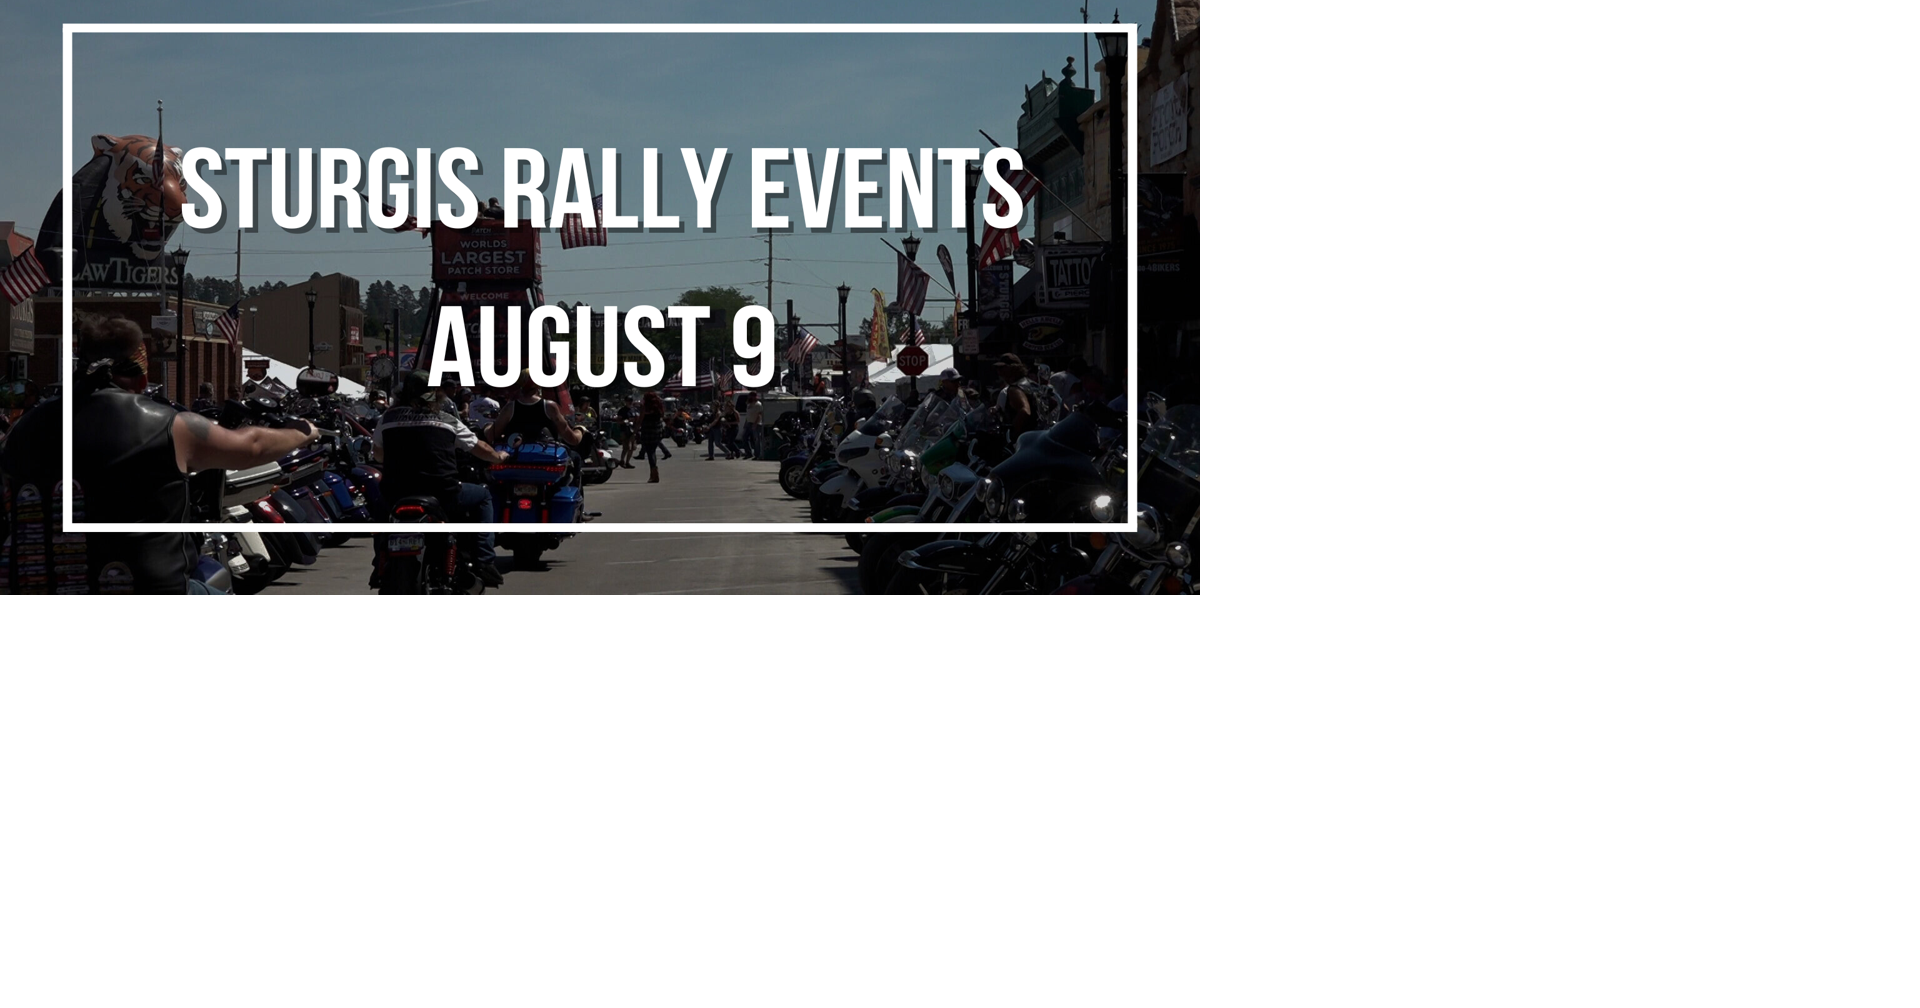 Sturgis Rally Events & Concerts August 9 Events newscenter1.tv